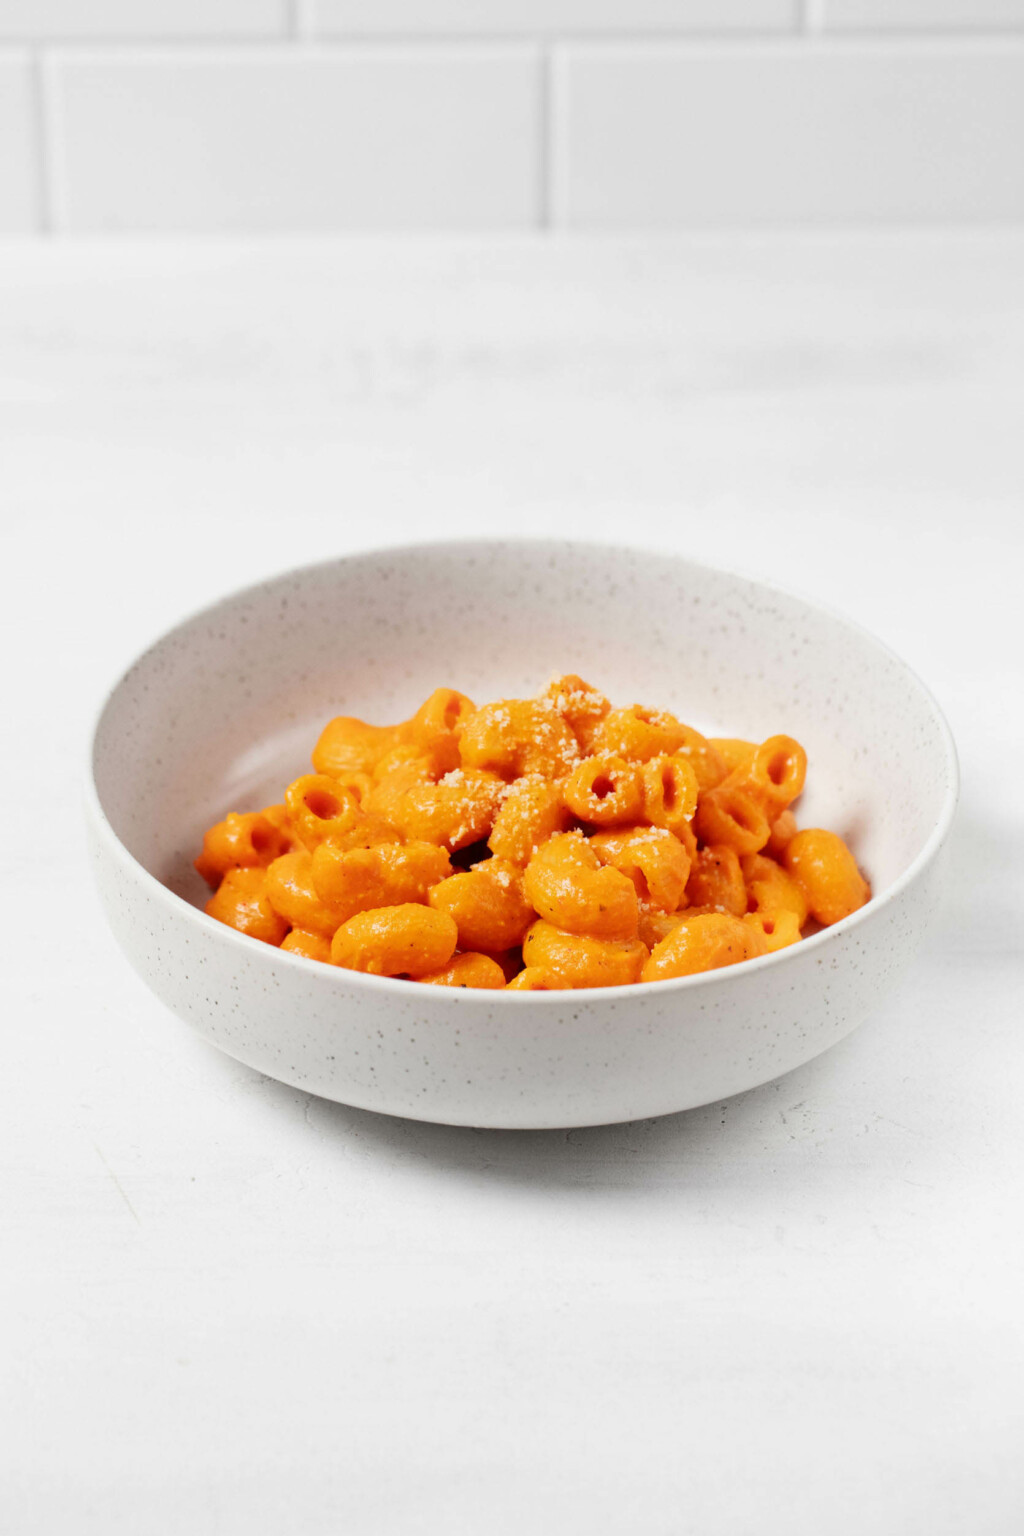 An angled photograph of a vegan red pepper mac and cheese, which is served in a round, white ceramic bowl. The bowl is resting on a white surface.